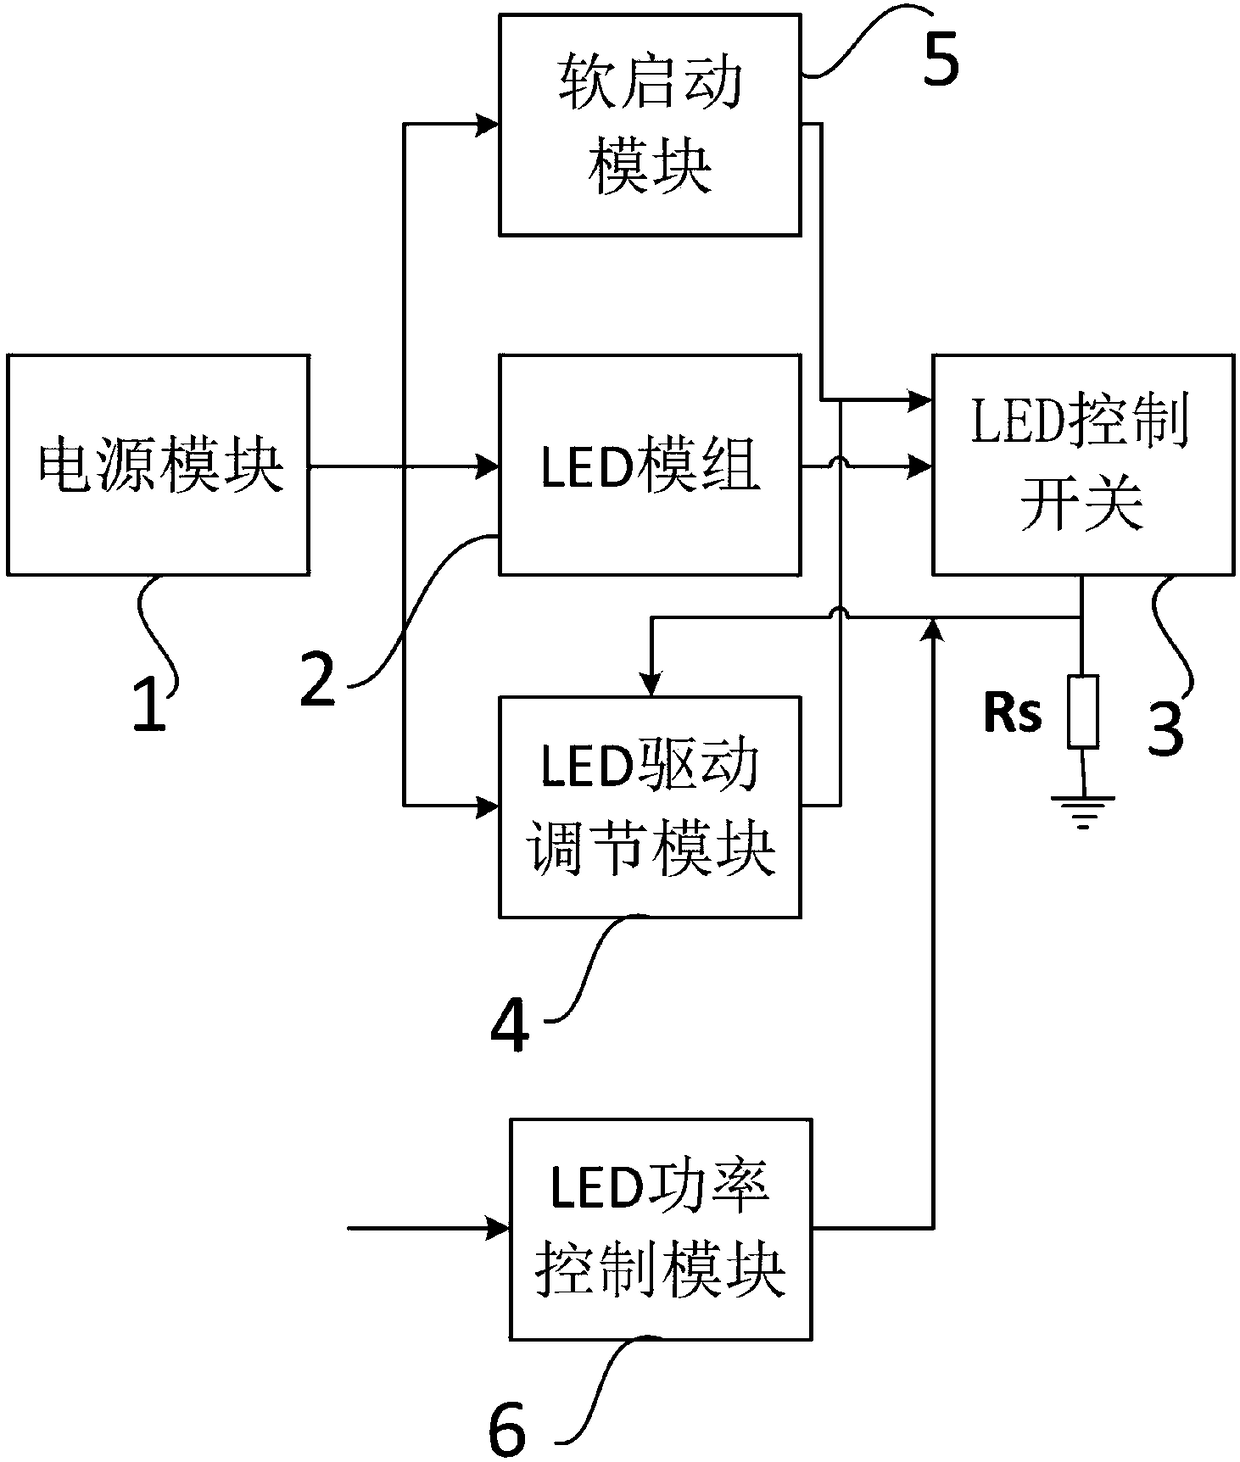 LED driving system